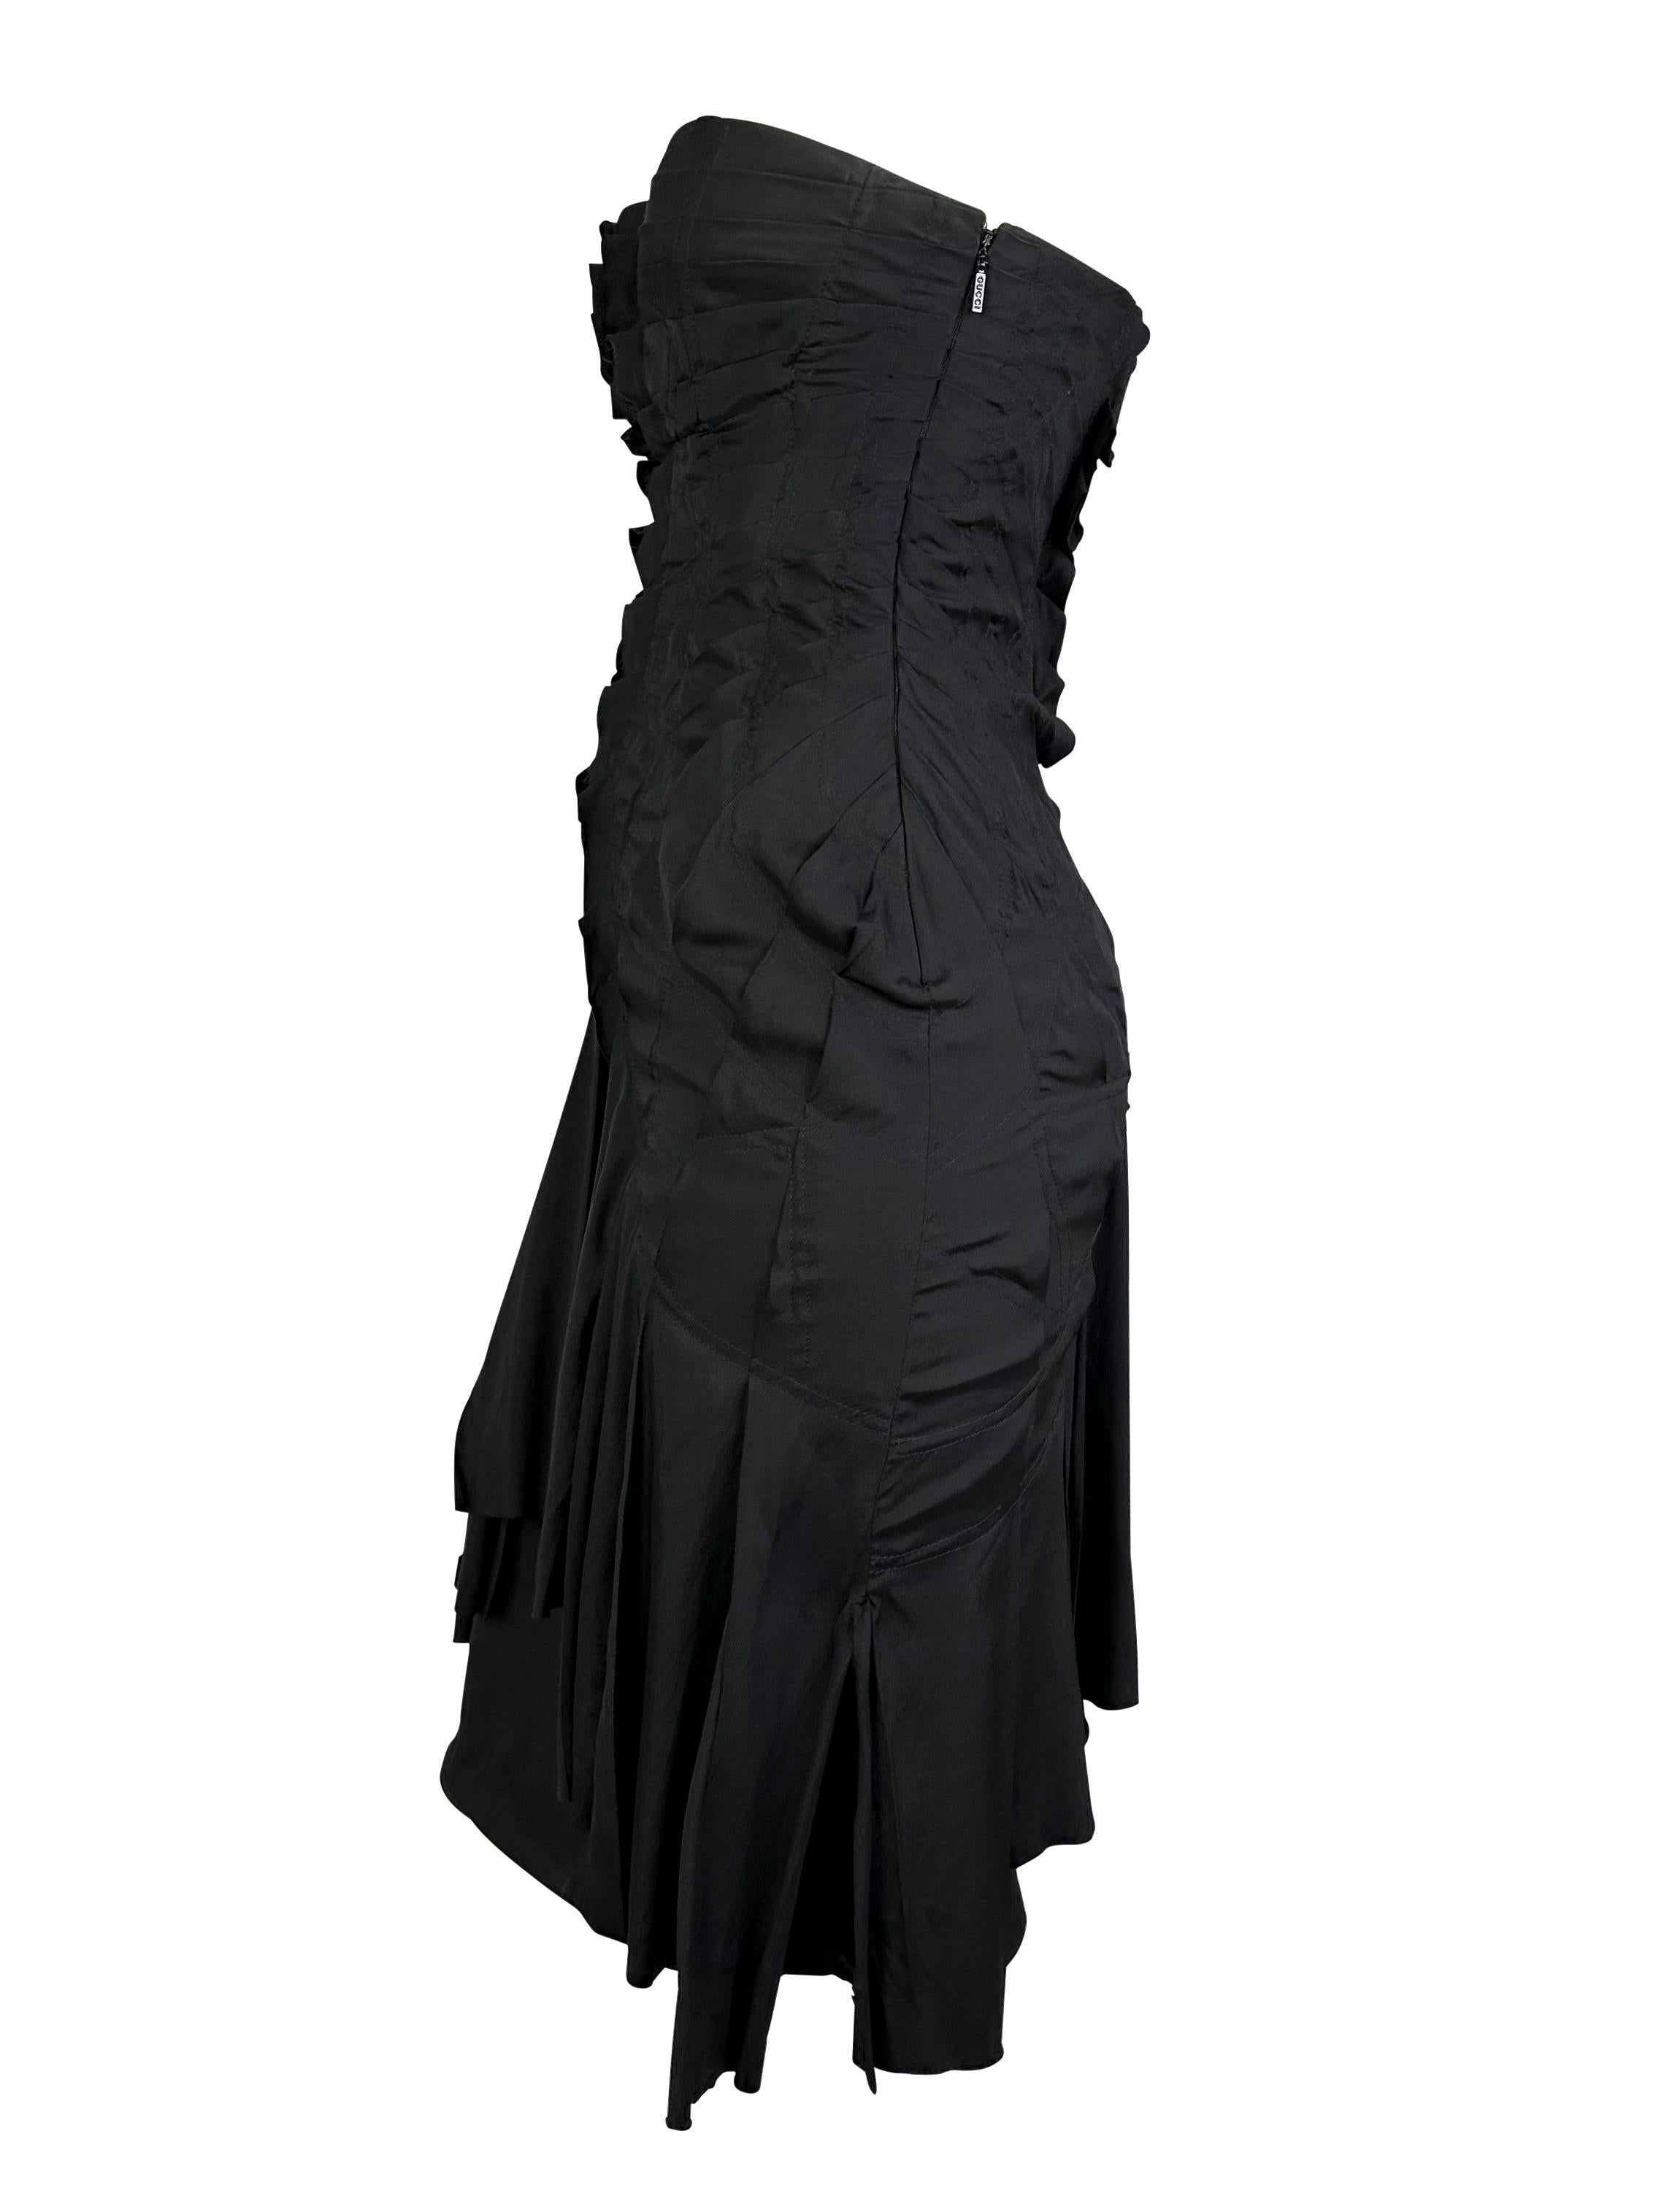 Women's S/S 2004 Gucci by Tom Ford Fan Pleated Silk Ribbon Cutout Black Strapless Dress For Sale